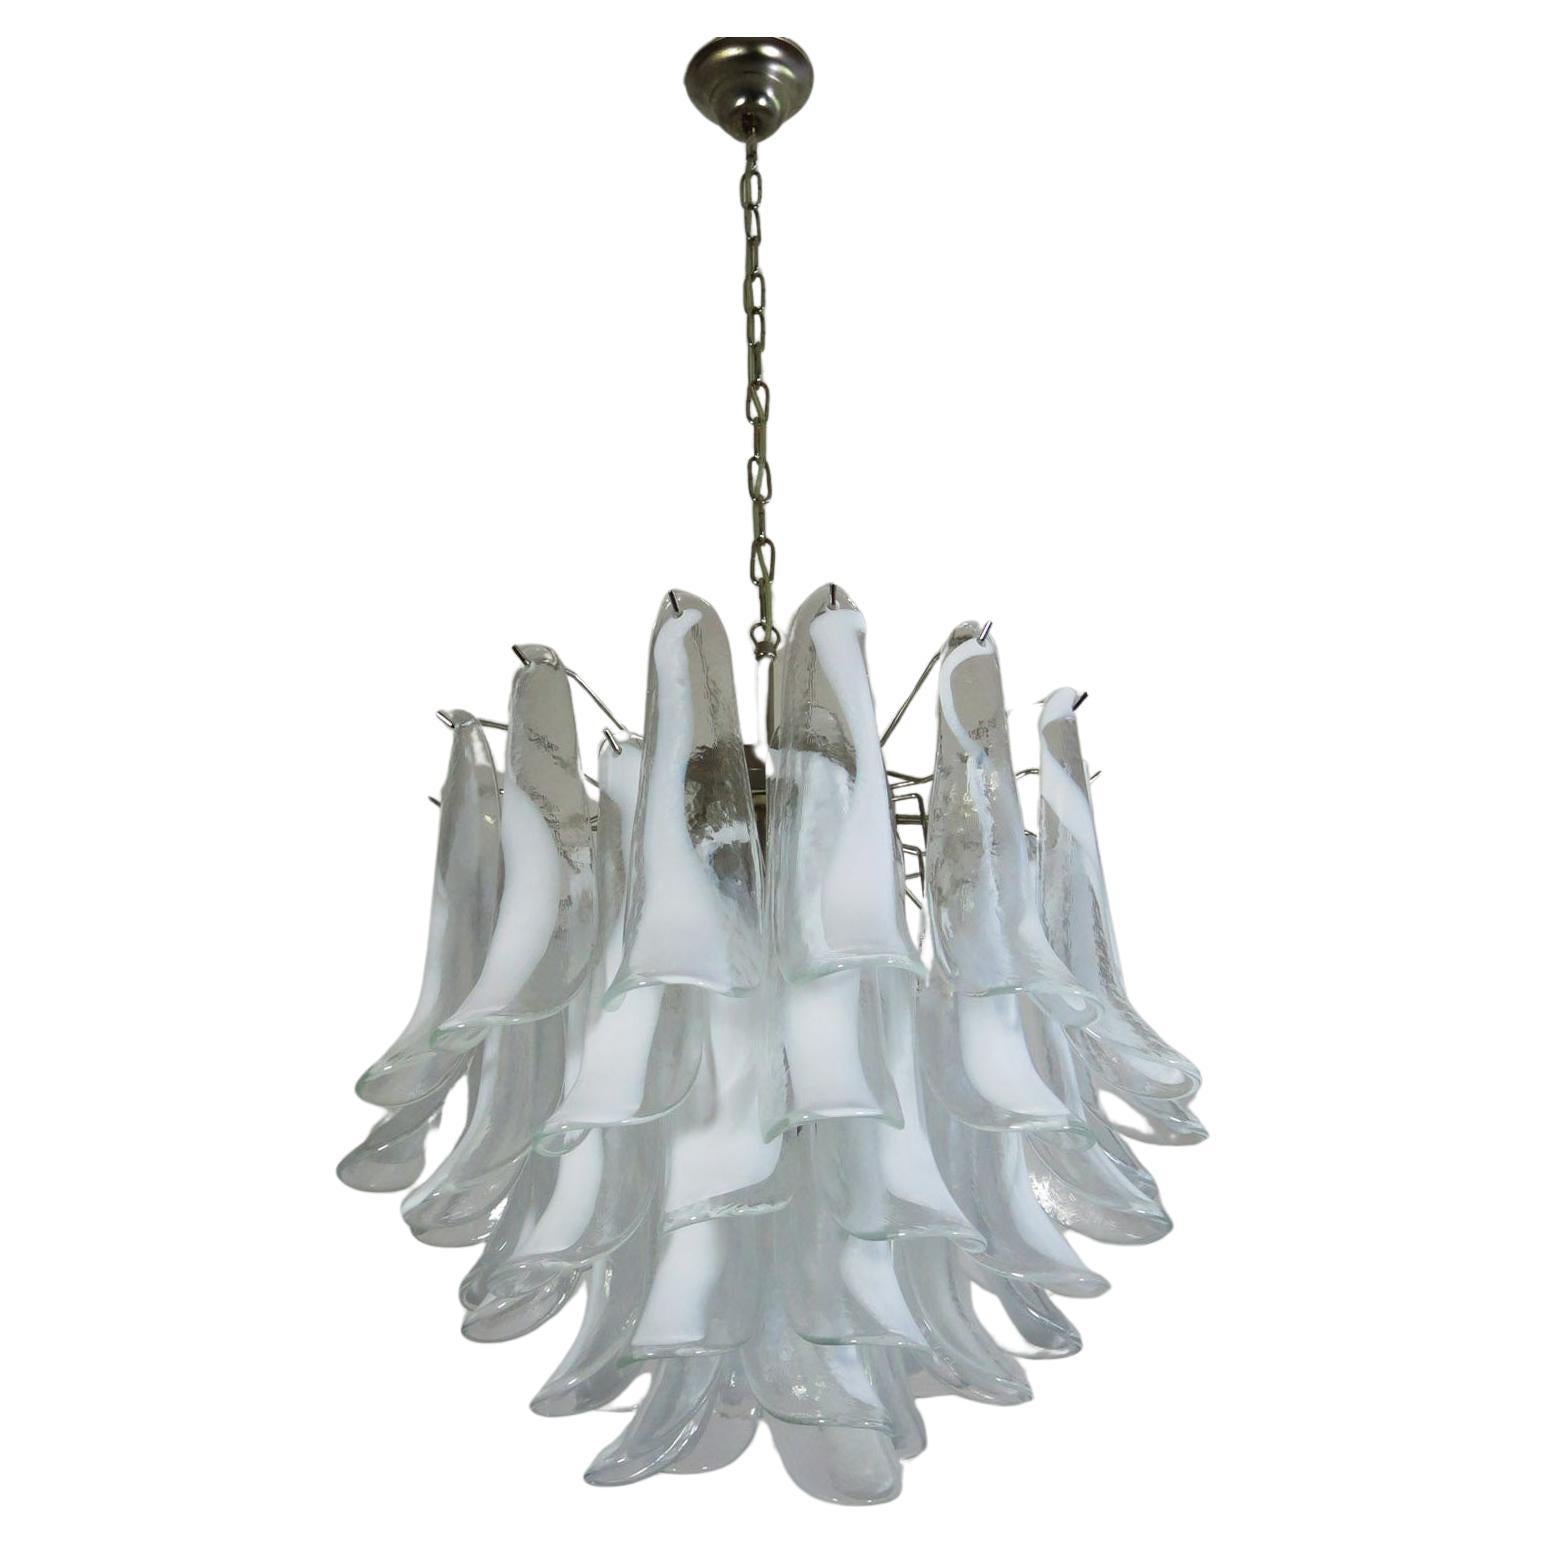 Italian vintage Murano chandelier in the manner of Mazzega - 41 glass petals For Sale